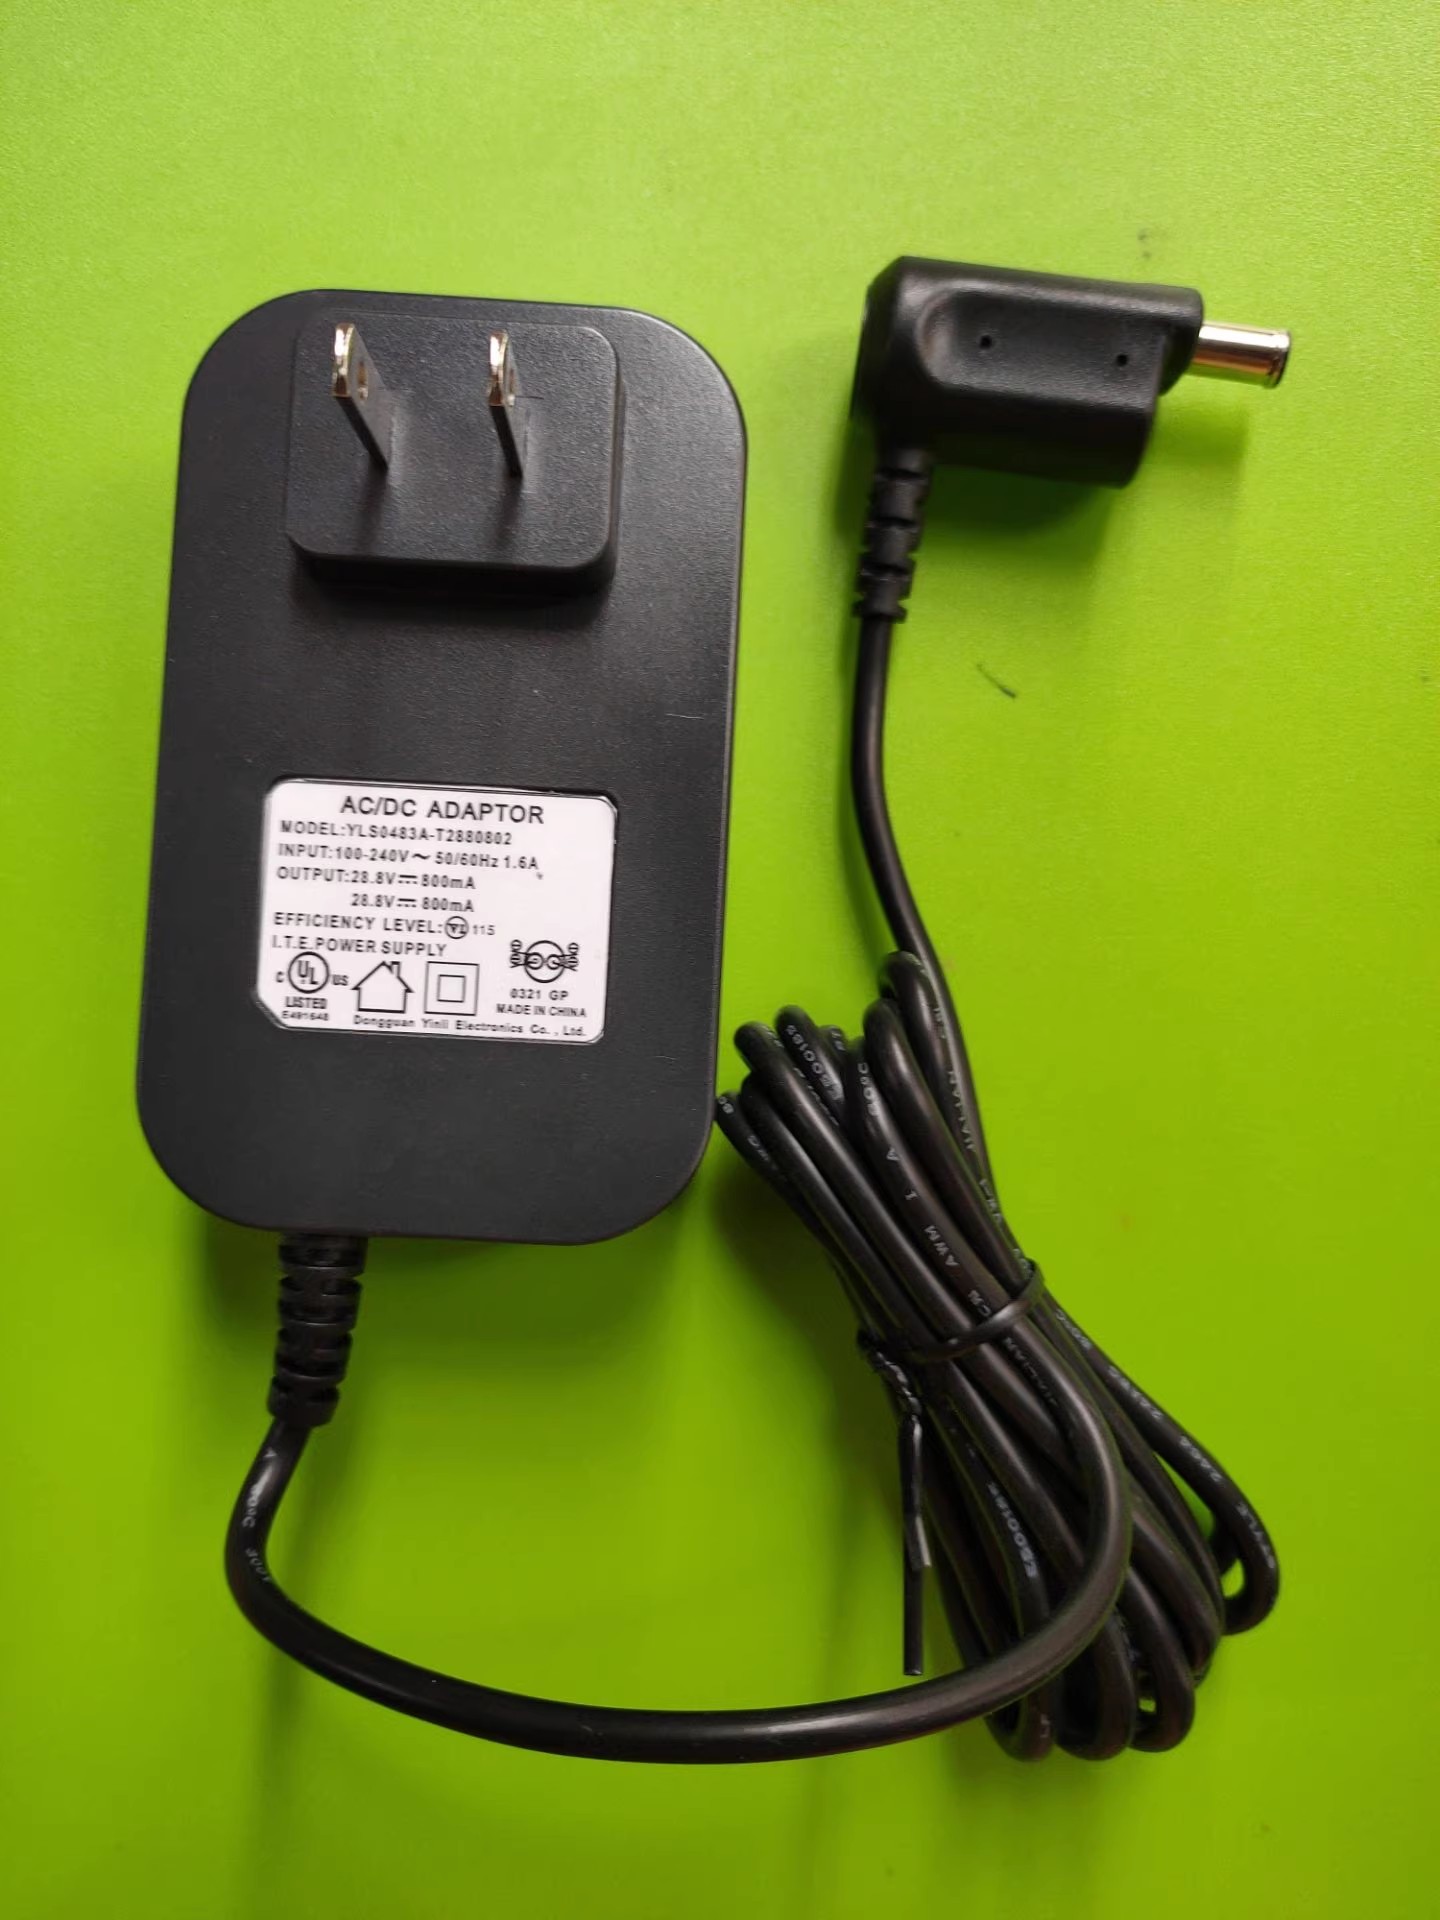 *Brand NEW* YLS0483A-T2880802 Shark 28.8V 800MA AC DC ADAPTHE POWER Supply